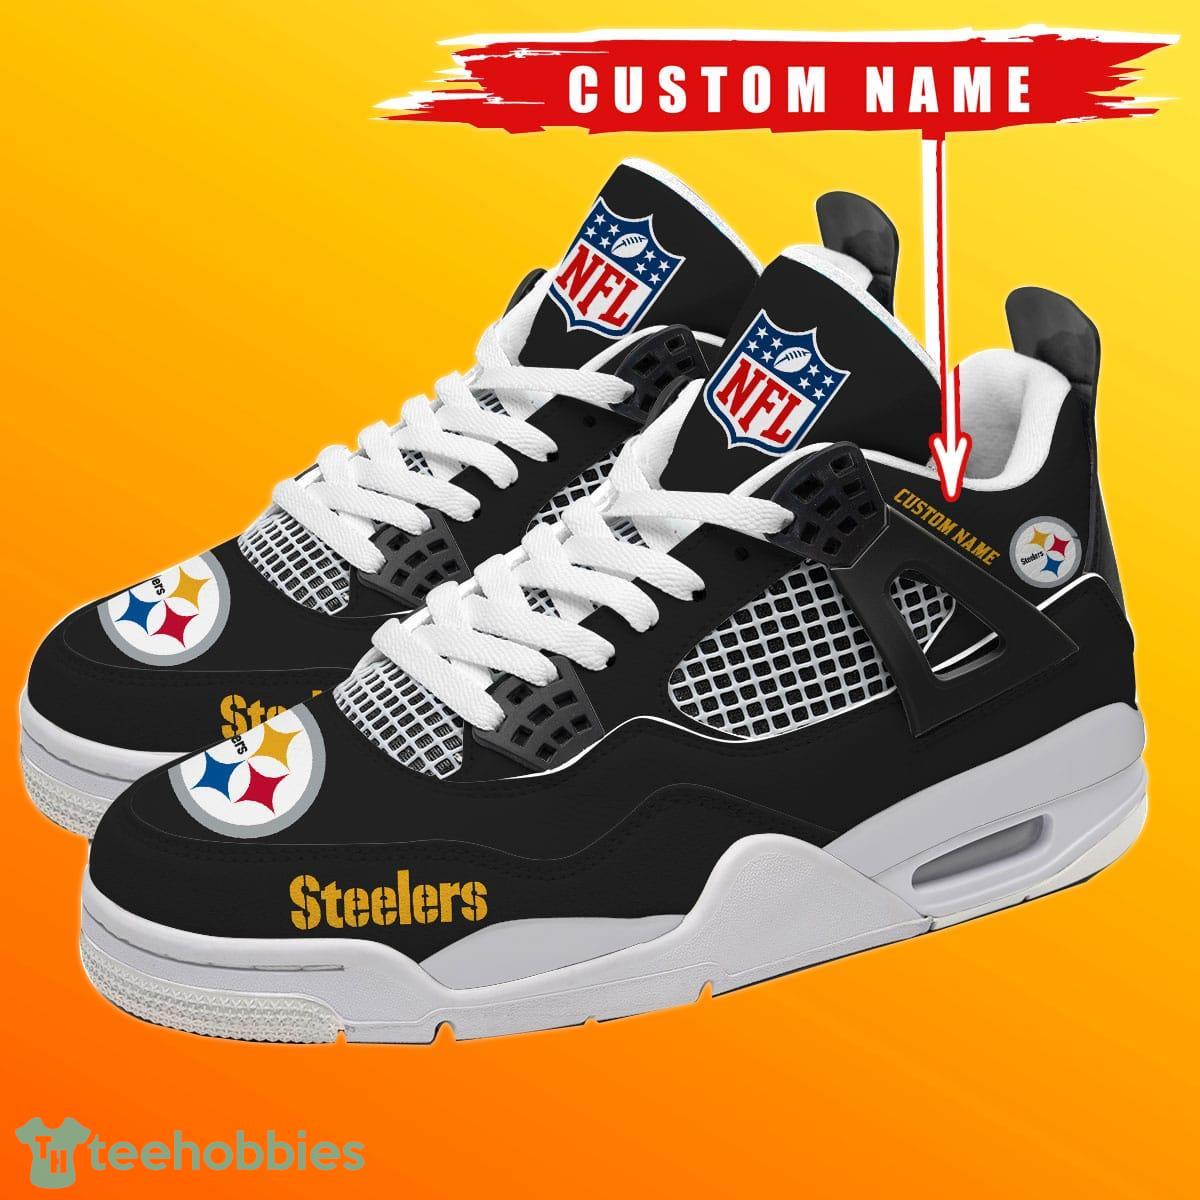 100 Pittsburgh Steelers Gift Ideas